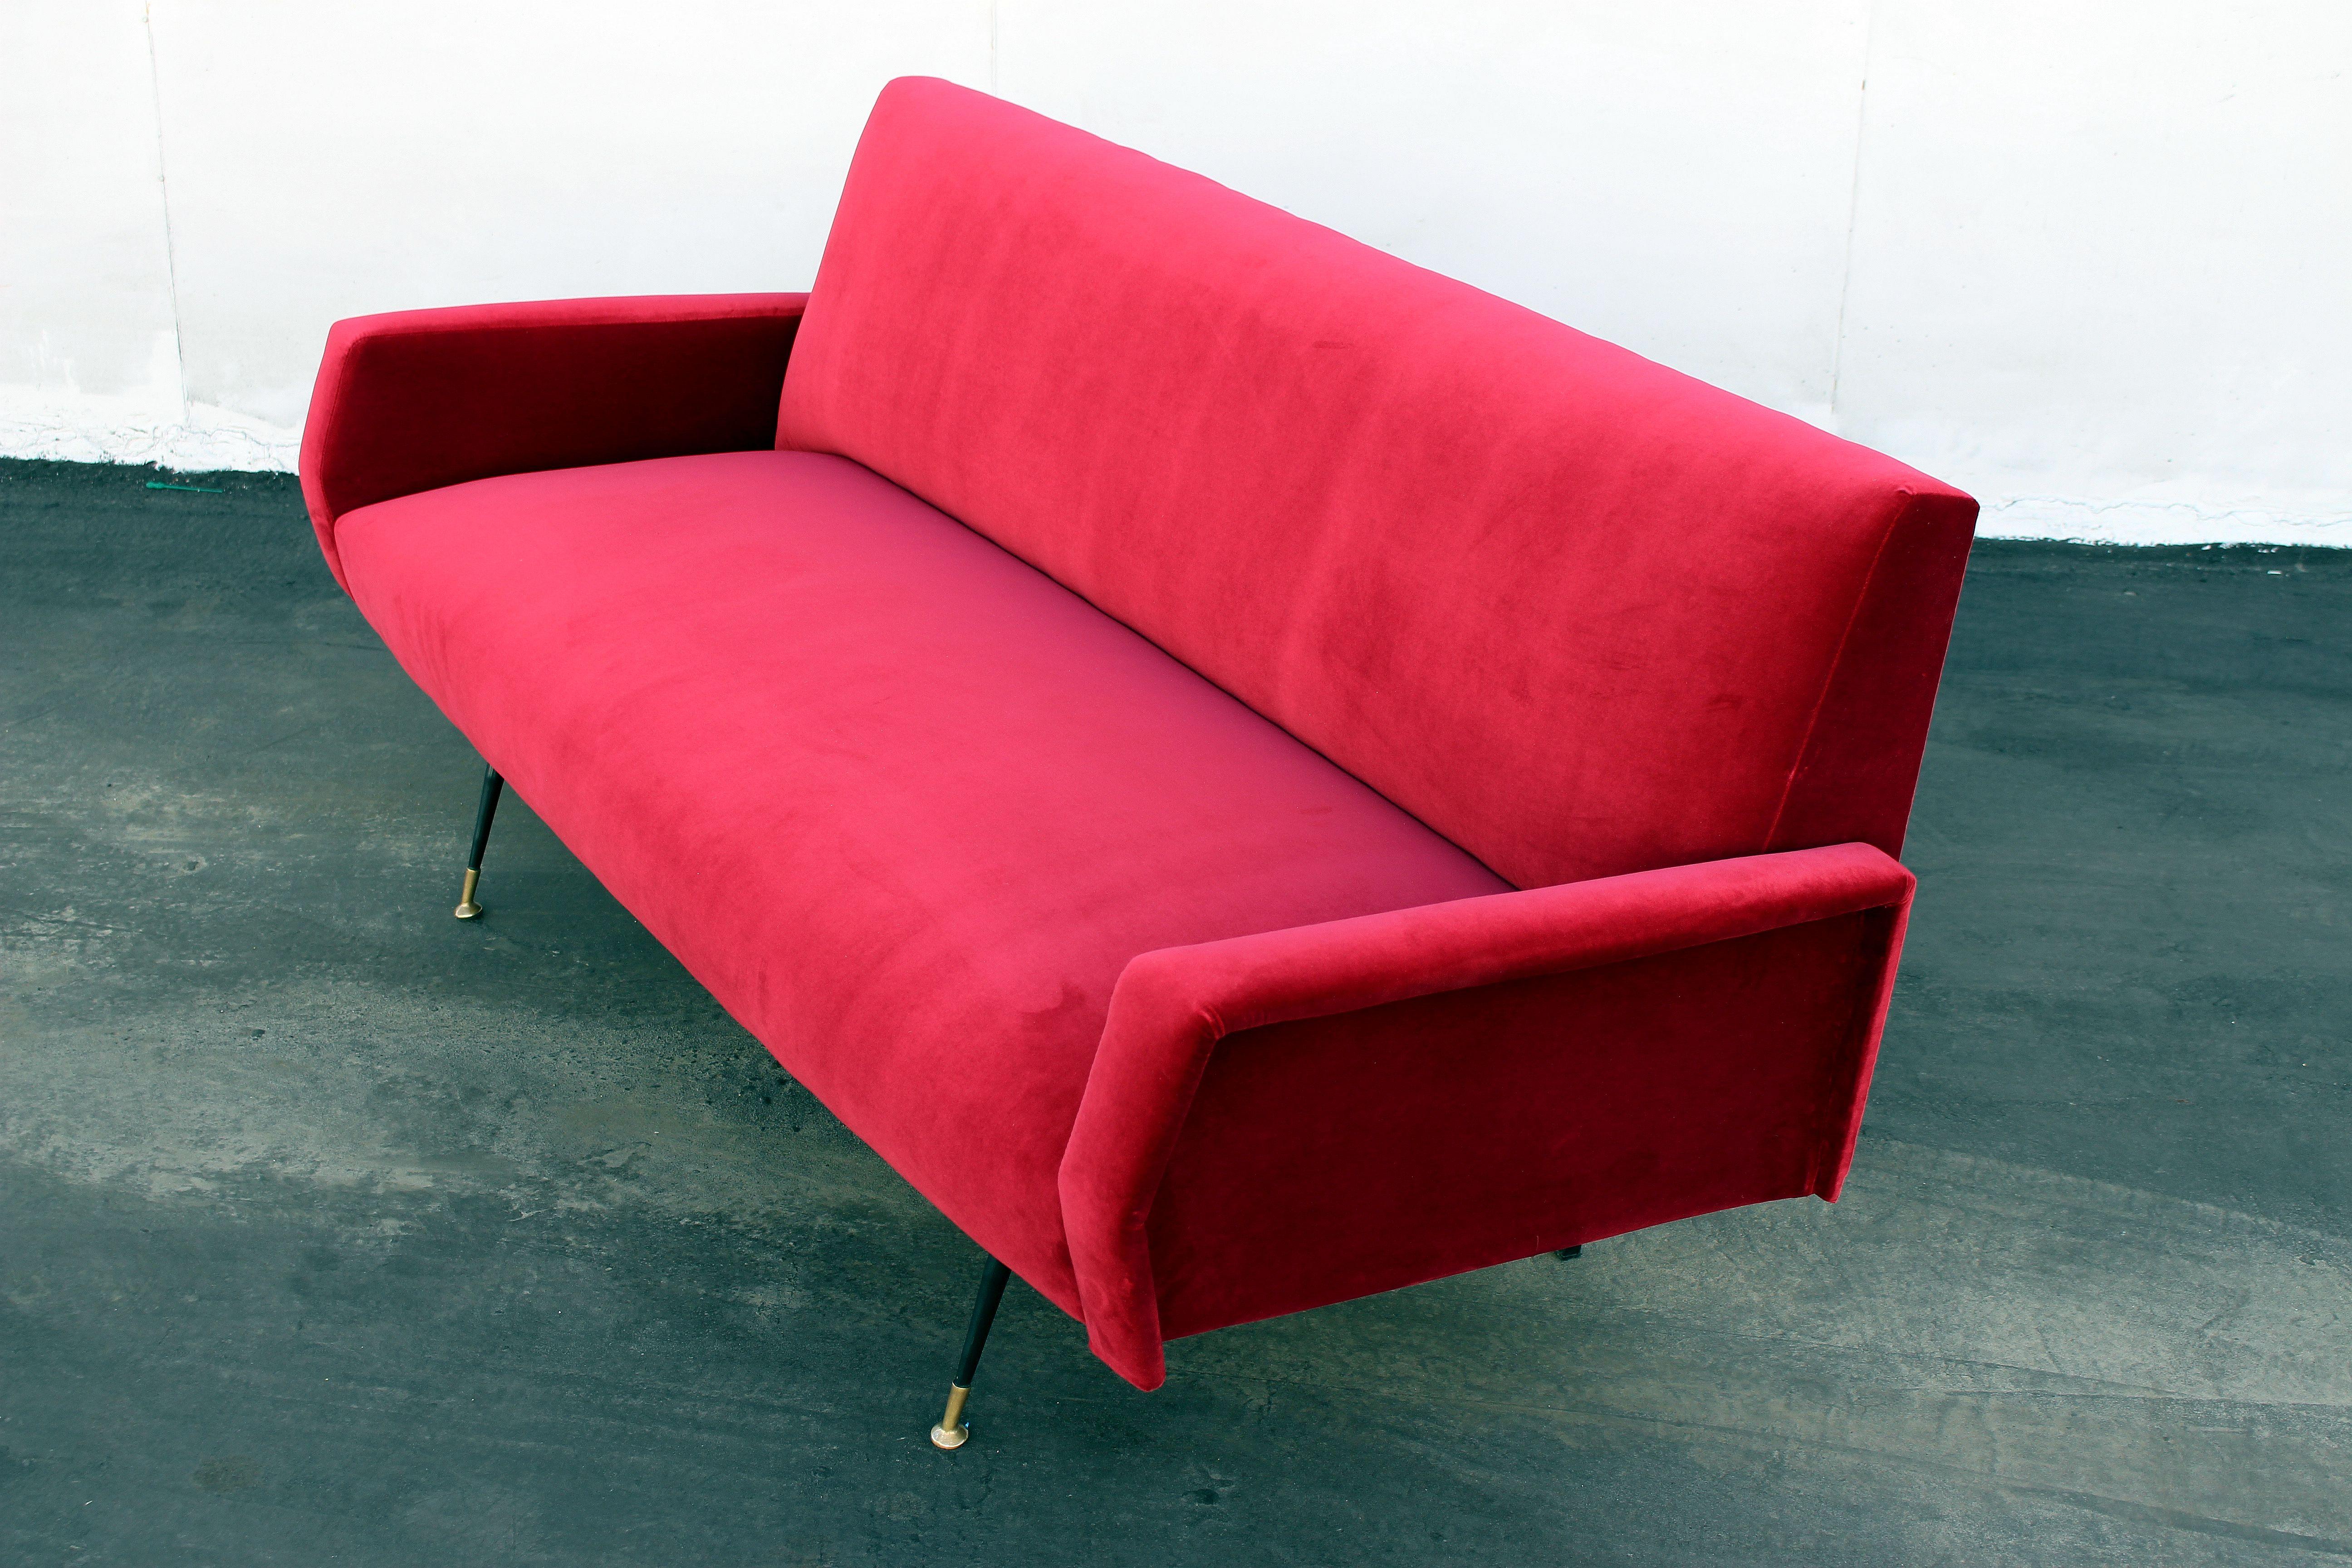 1950s Italian red velvet sofa. Re-upholstered in velvet, original hard wood base with the metal and brass legs.
Shipping to US continental in home delivery $500
        